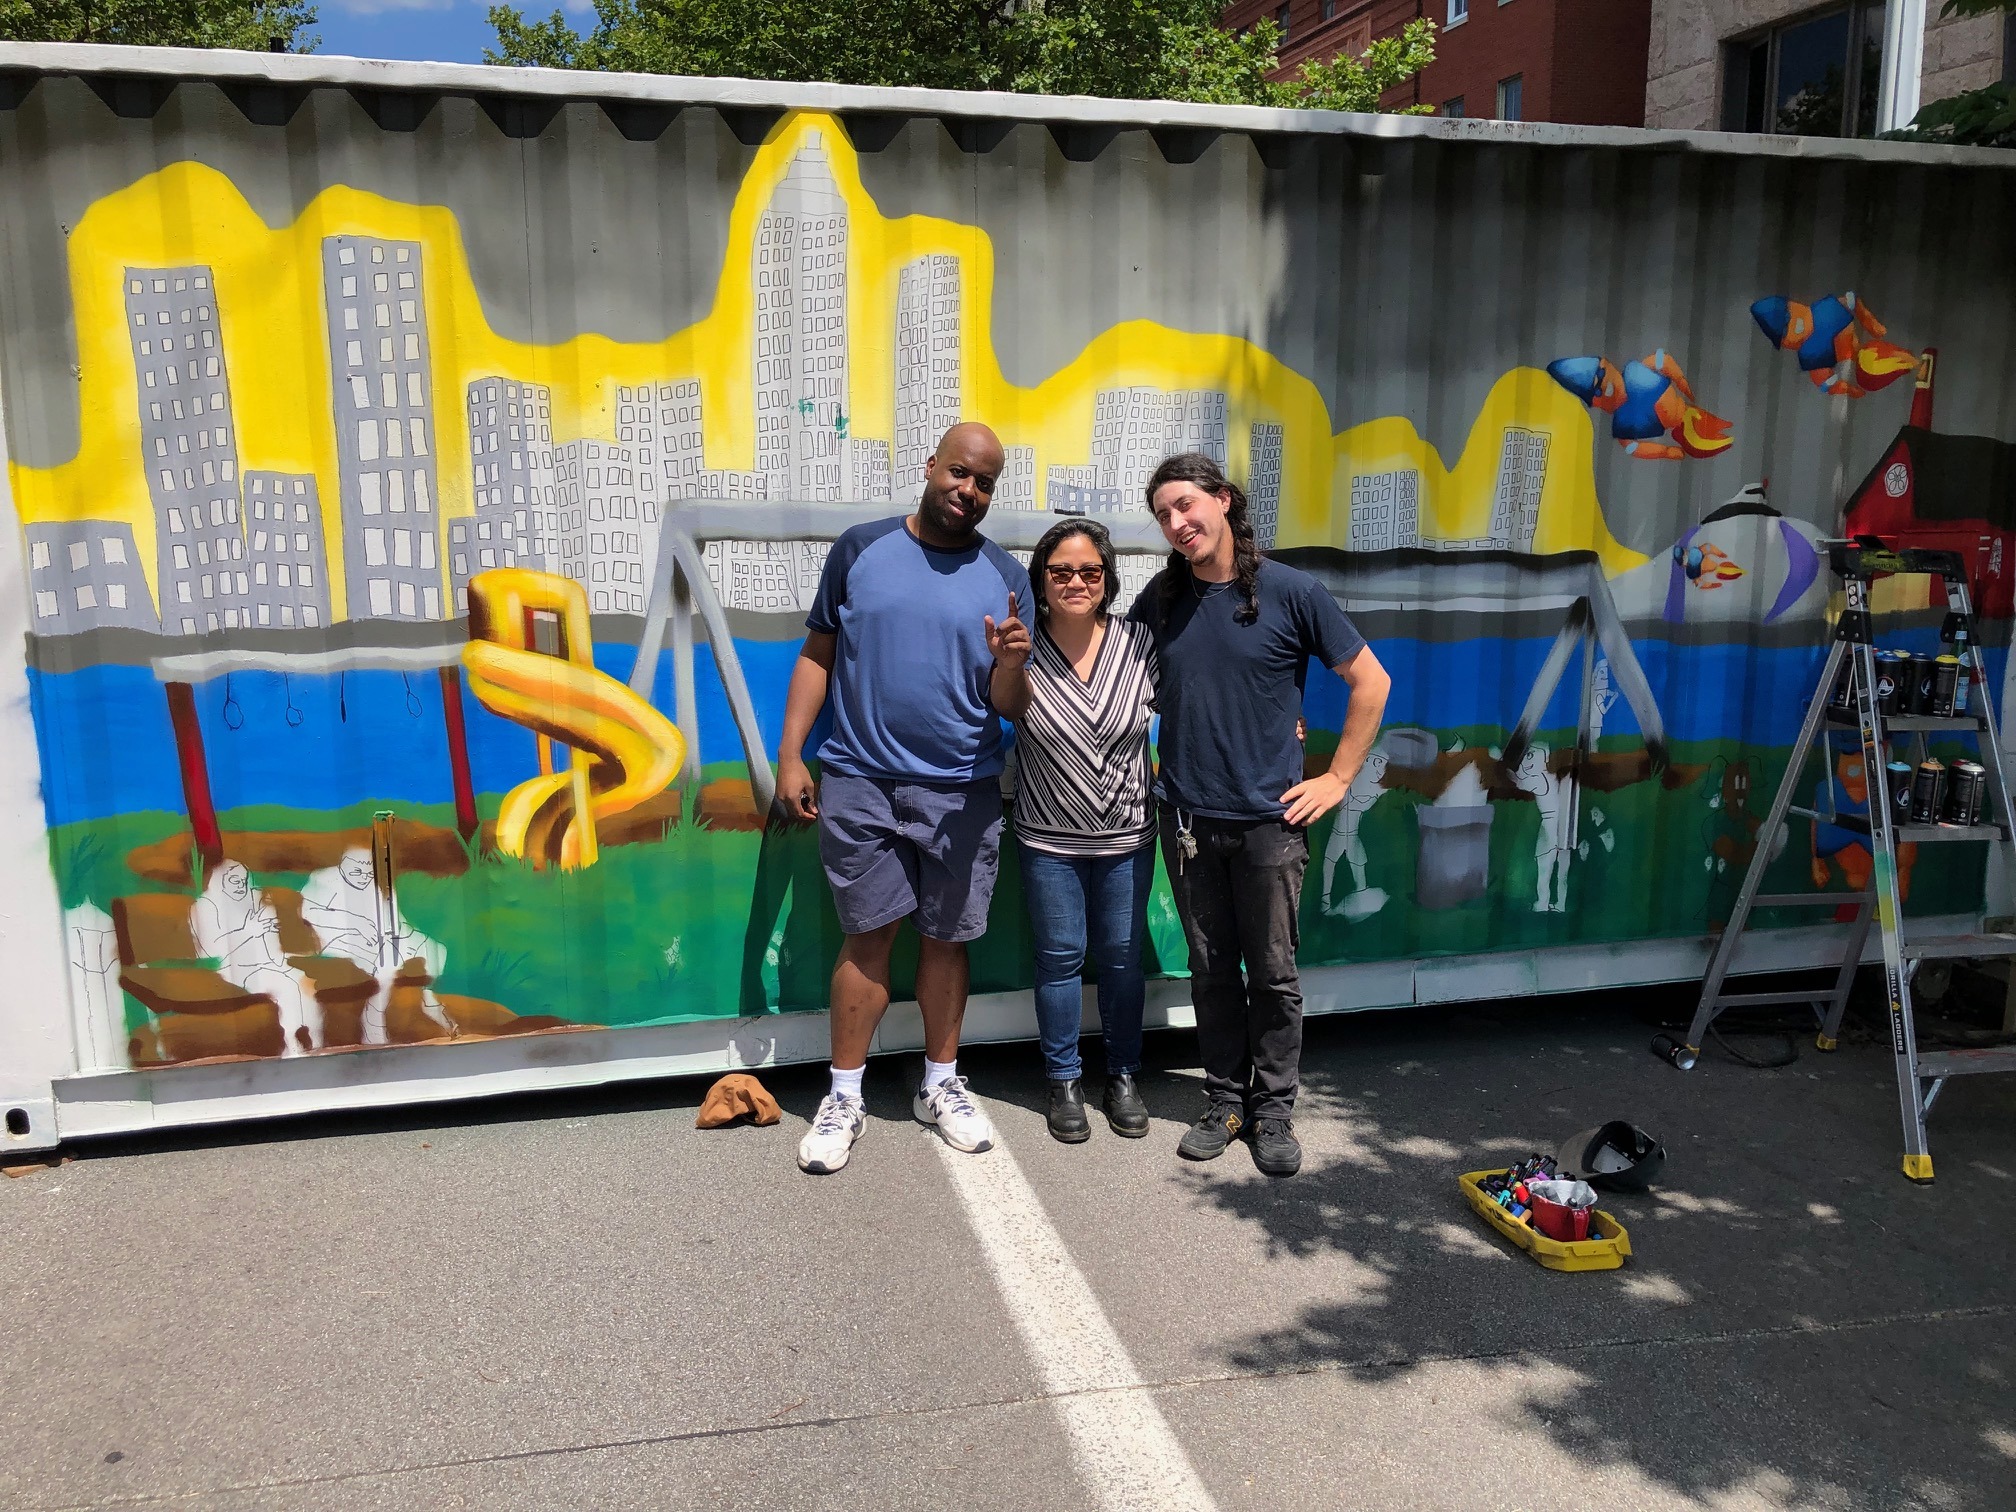 Three artists, Matthew Carroll, Fran Ledonia Flaherty, and Max Gonzales in front of a mural painted on the side of a shipping container